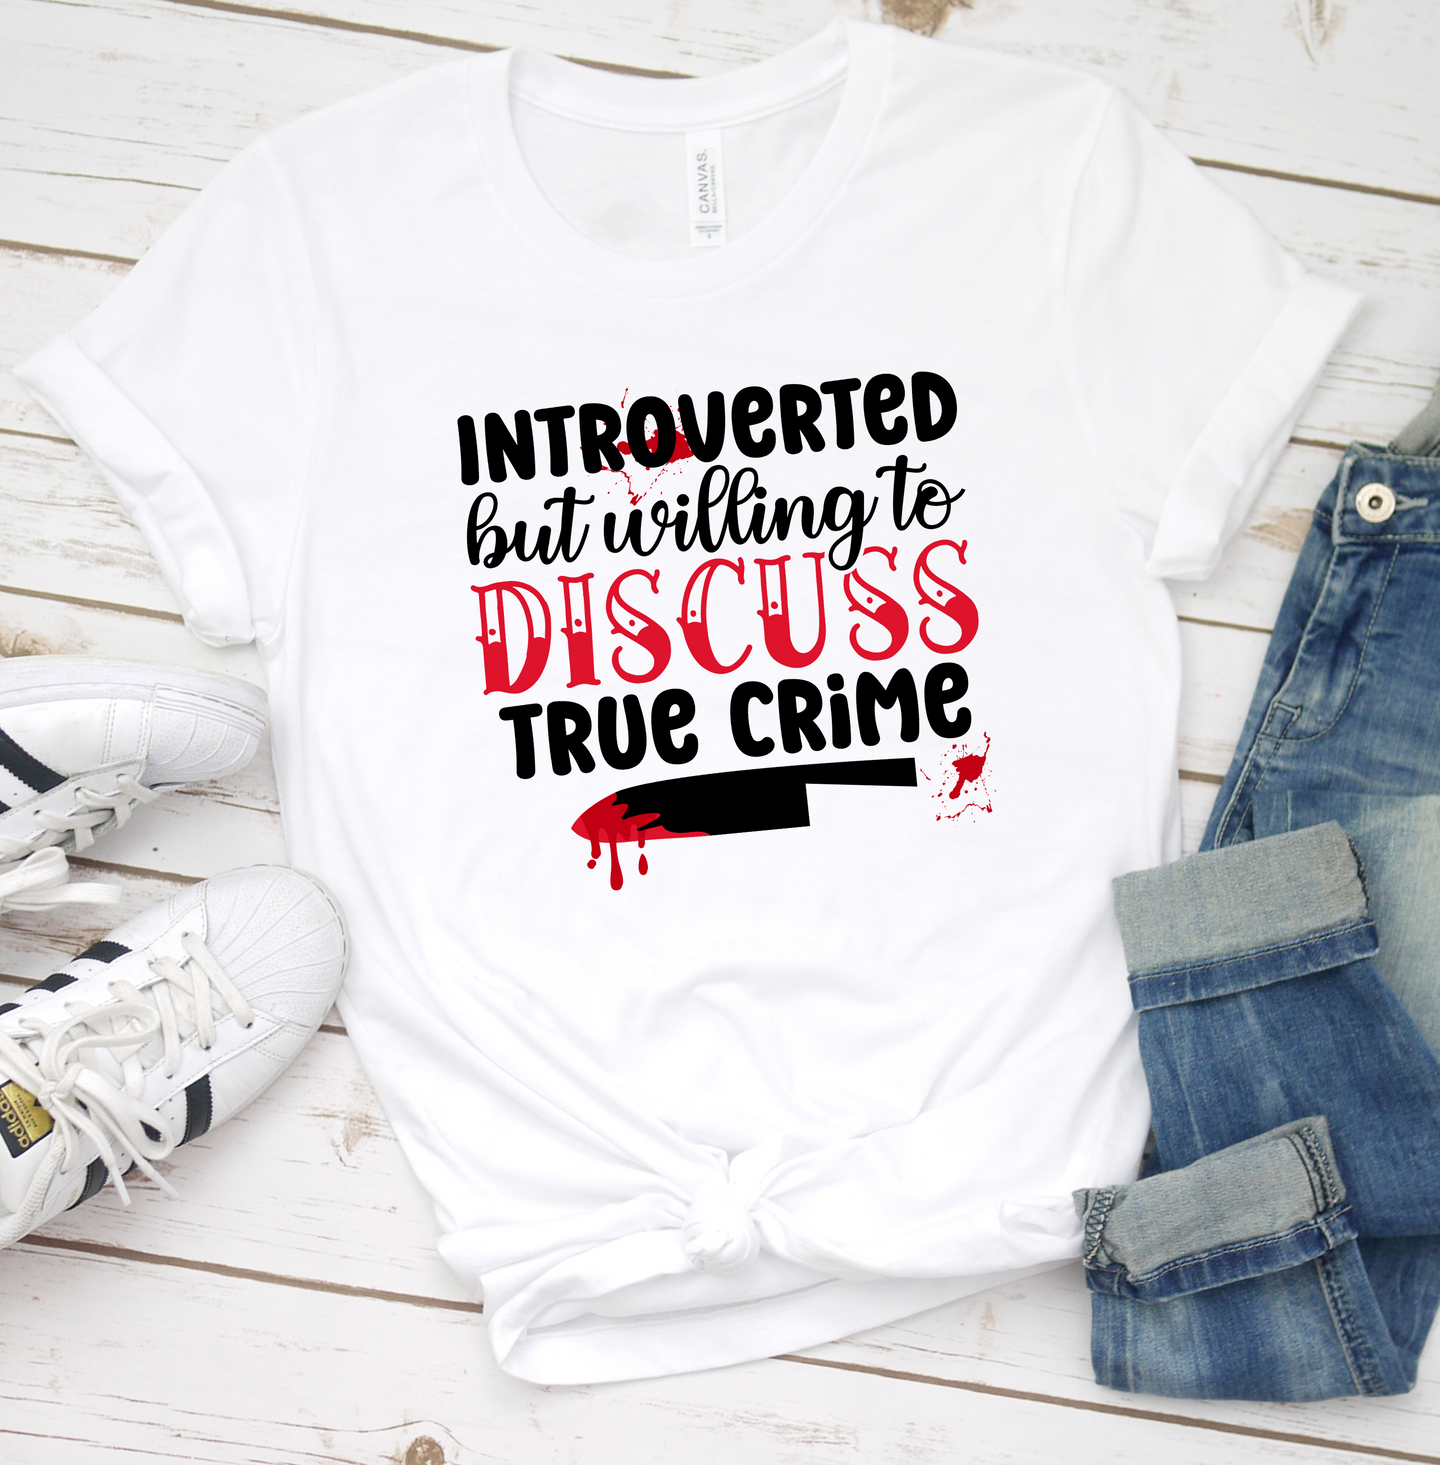 Introverted But Willing to Discuss True Crime Graphic T-Shirt